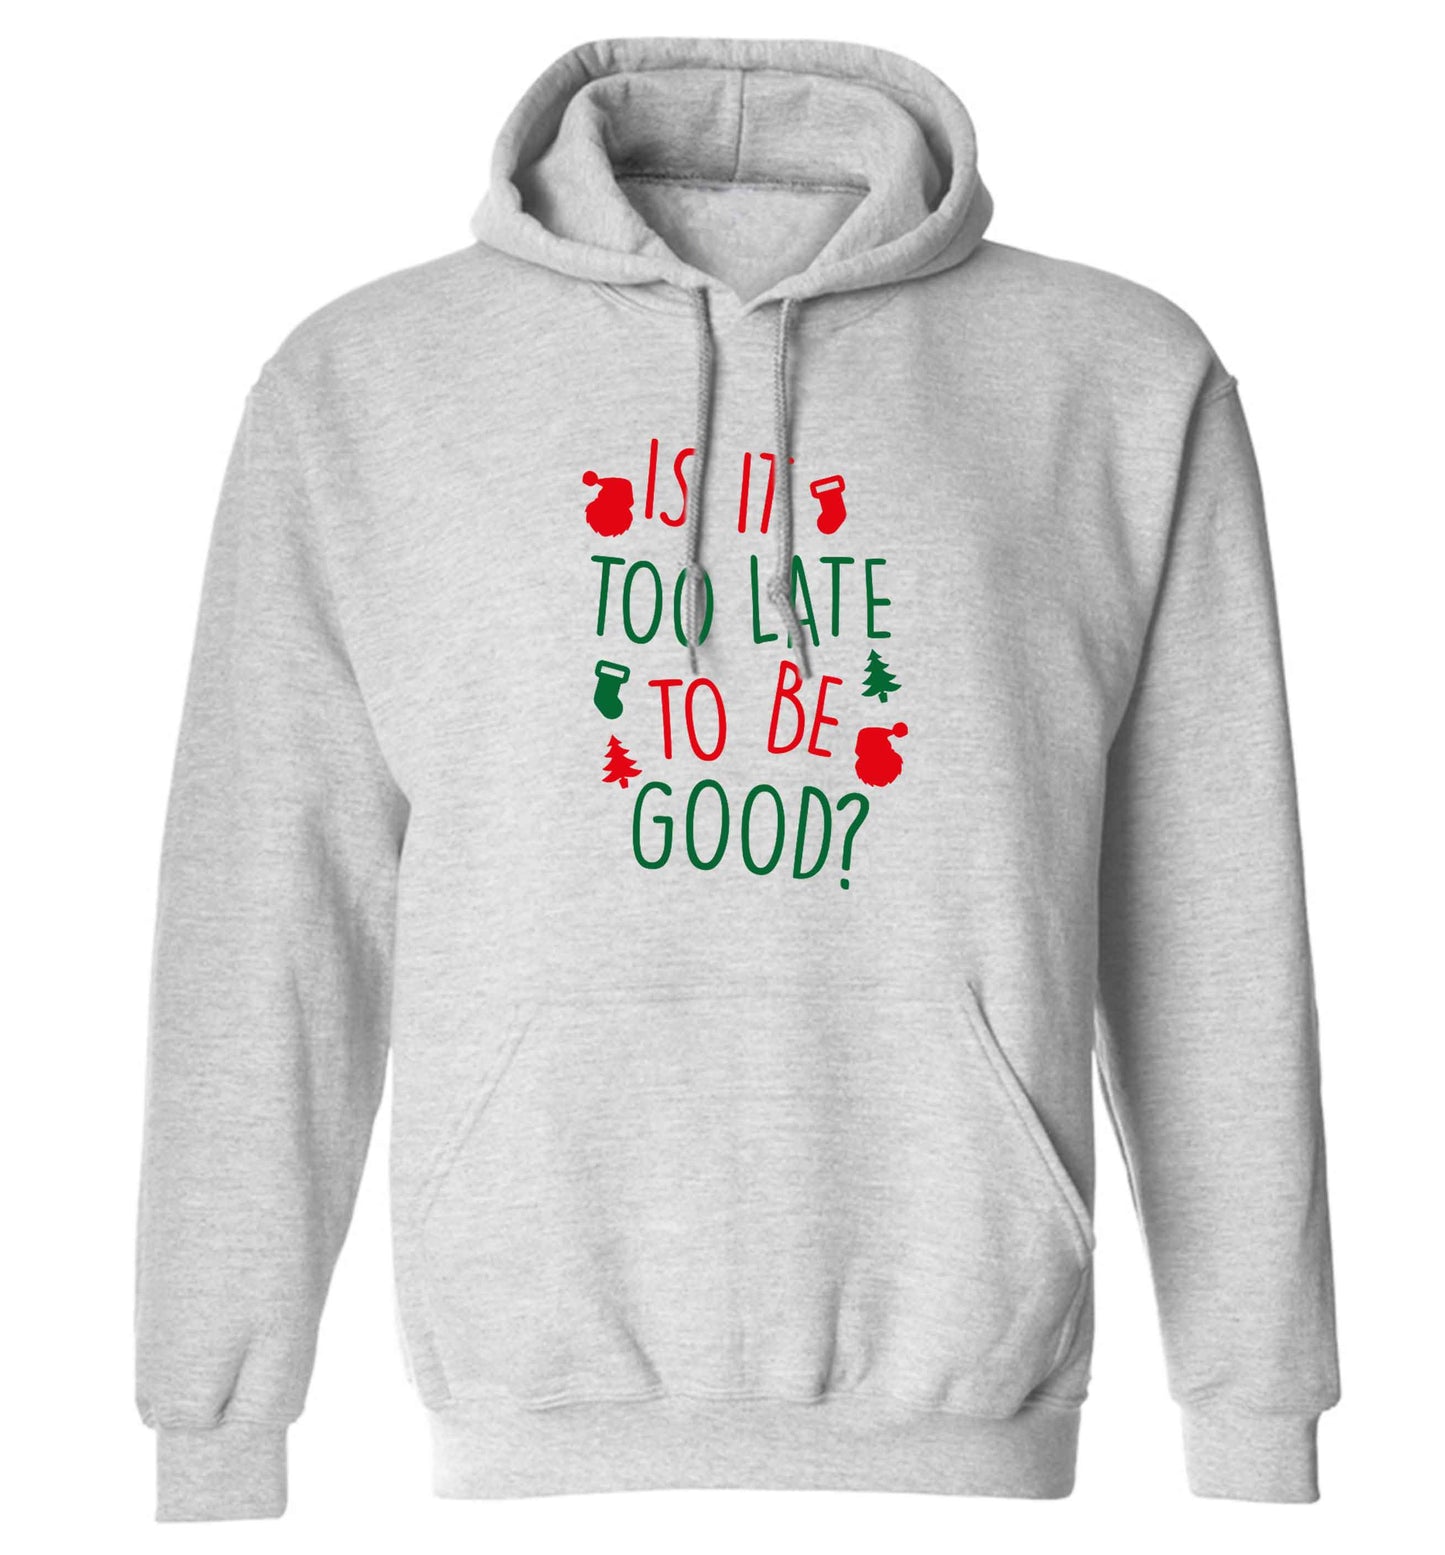 Too Late to be Good adults unisex grey hoodie 2XL